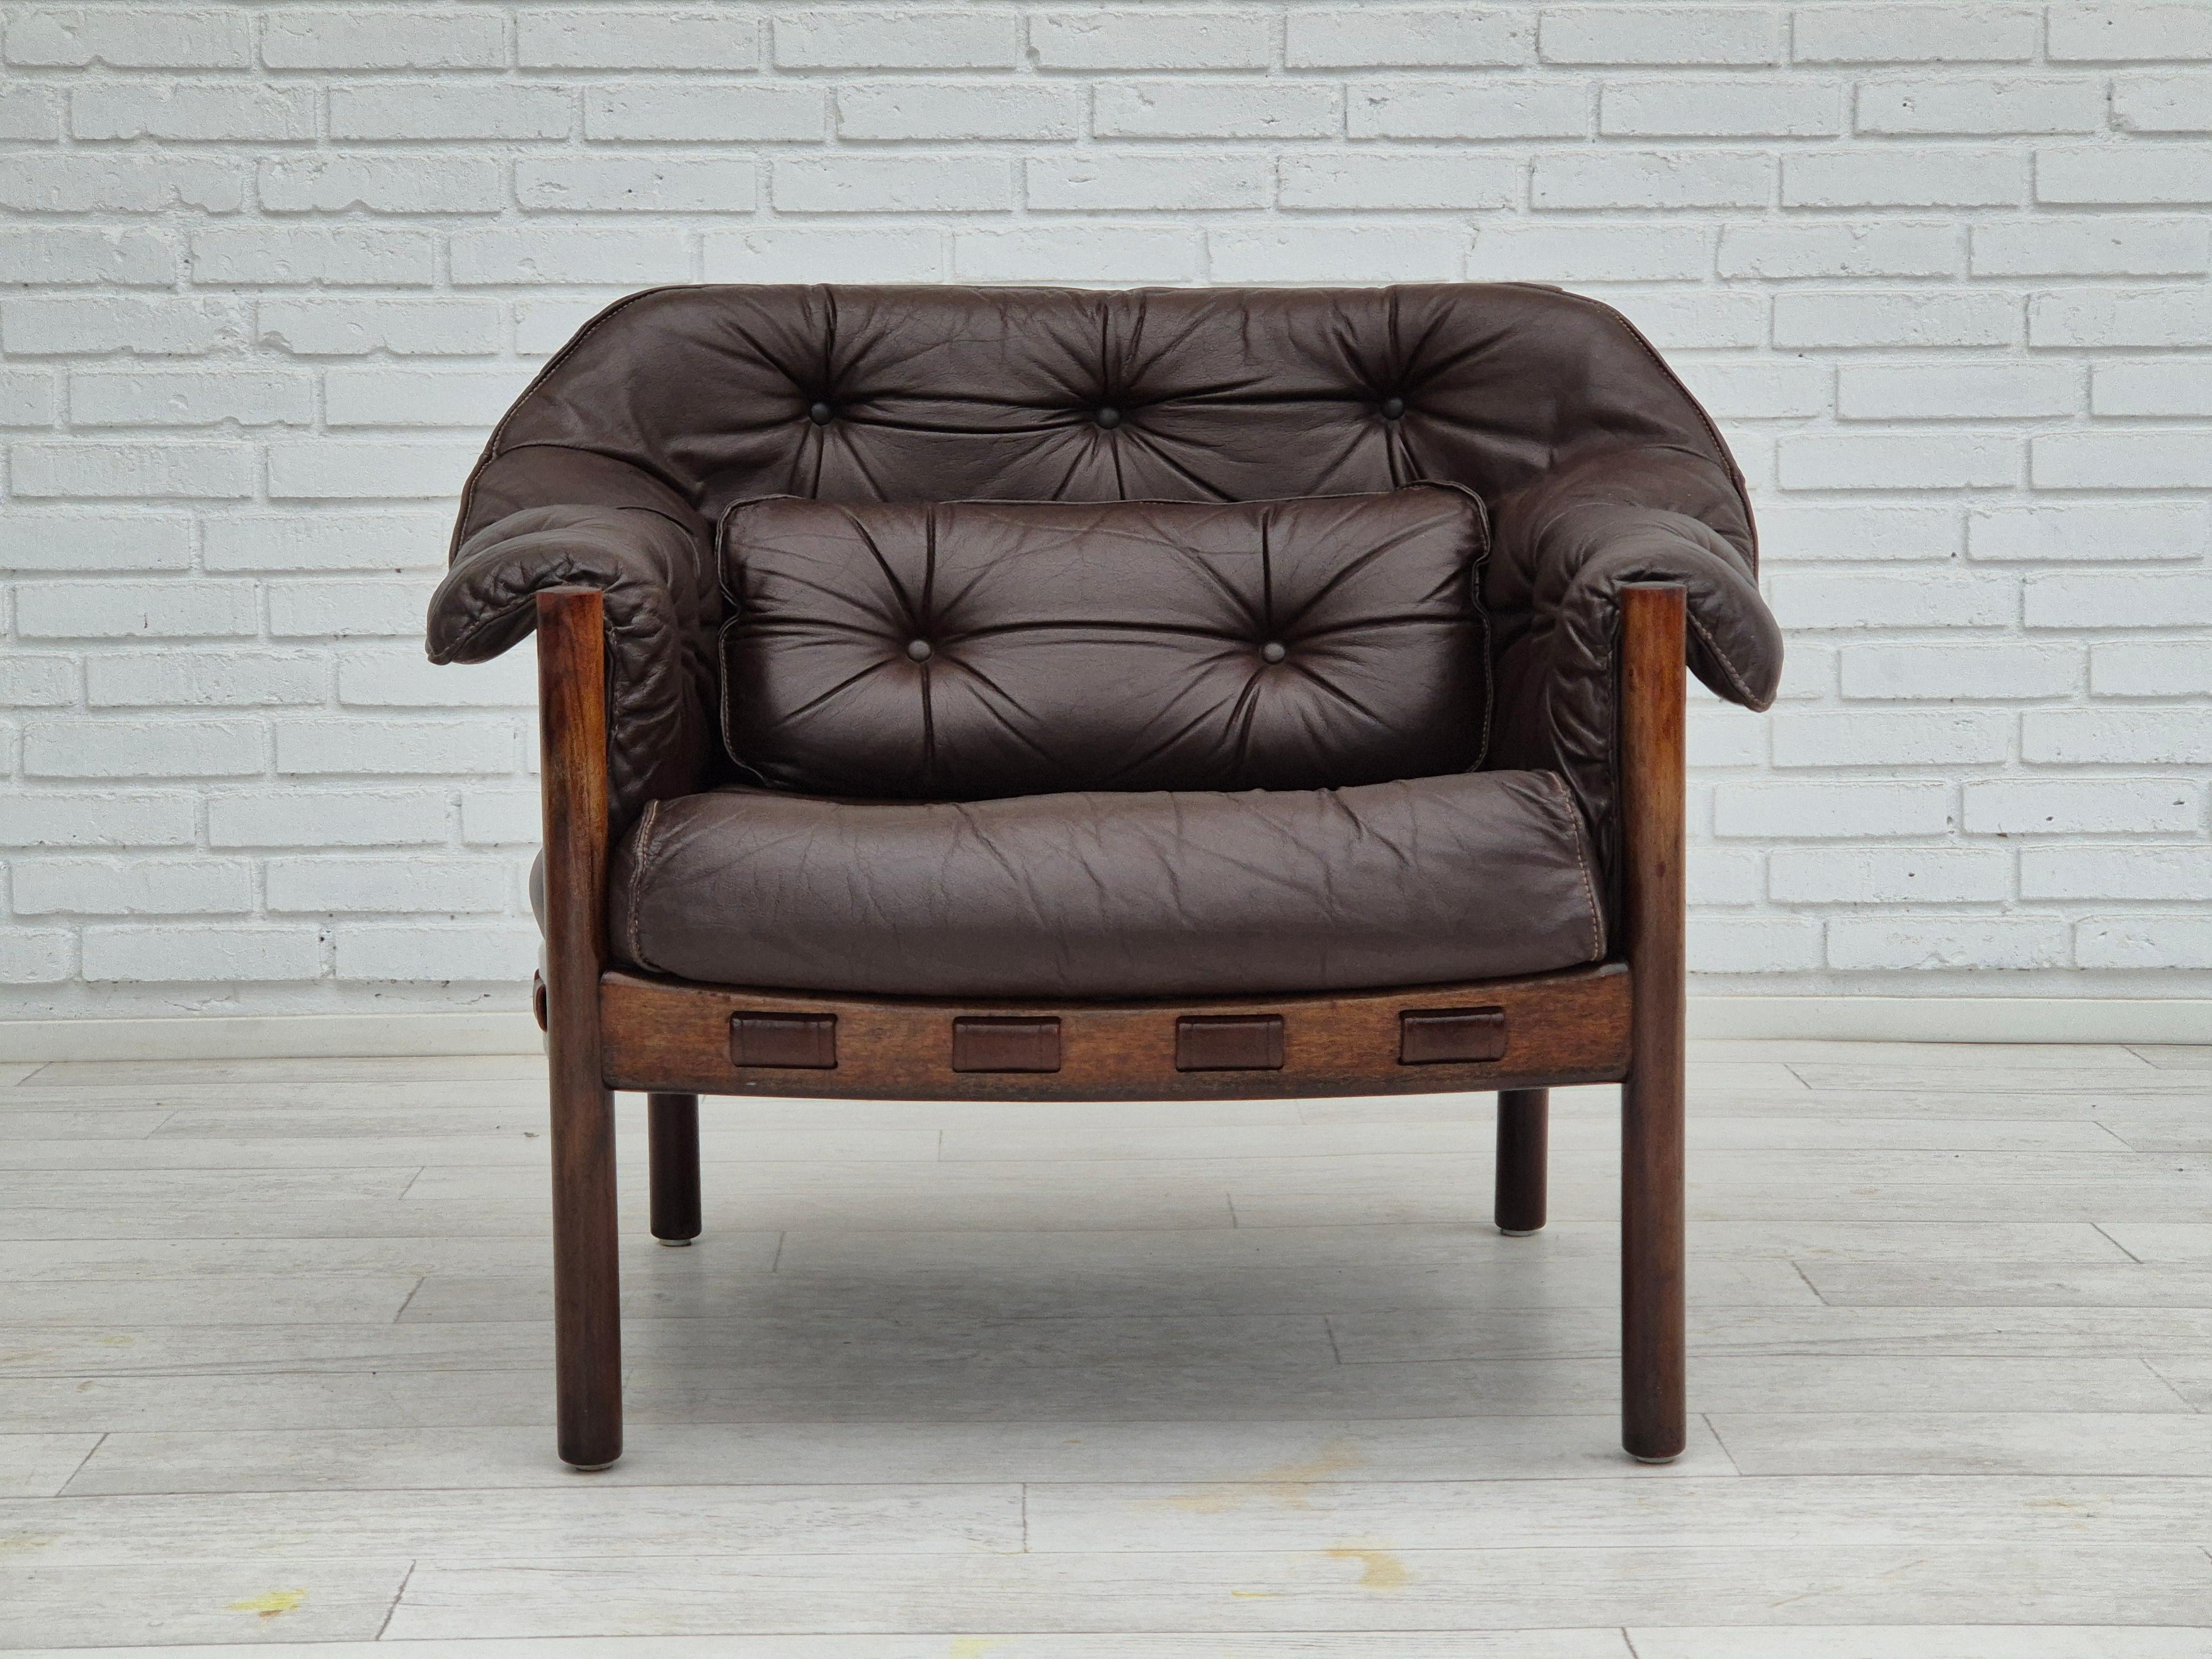 1970s, Scandinavian design by Arne Norell. Lounge chair in original very good condition: no smells and no stains. Original brown leather, beech wood. Manufactured by Swedish furniture manufacturer in about 1970s.